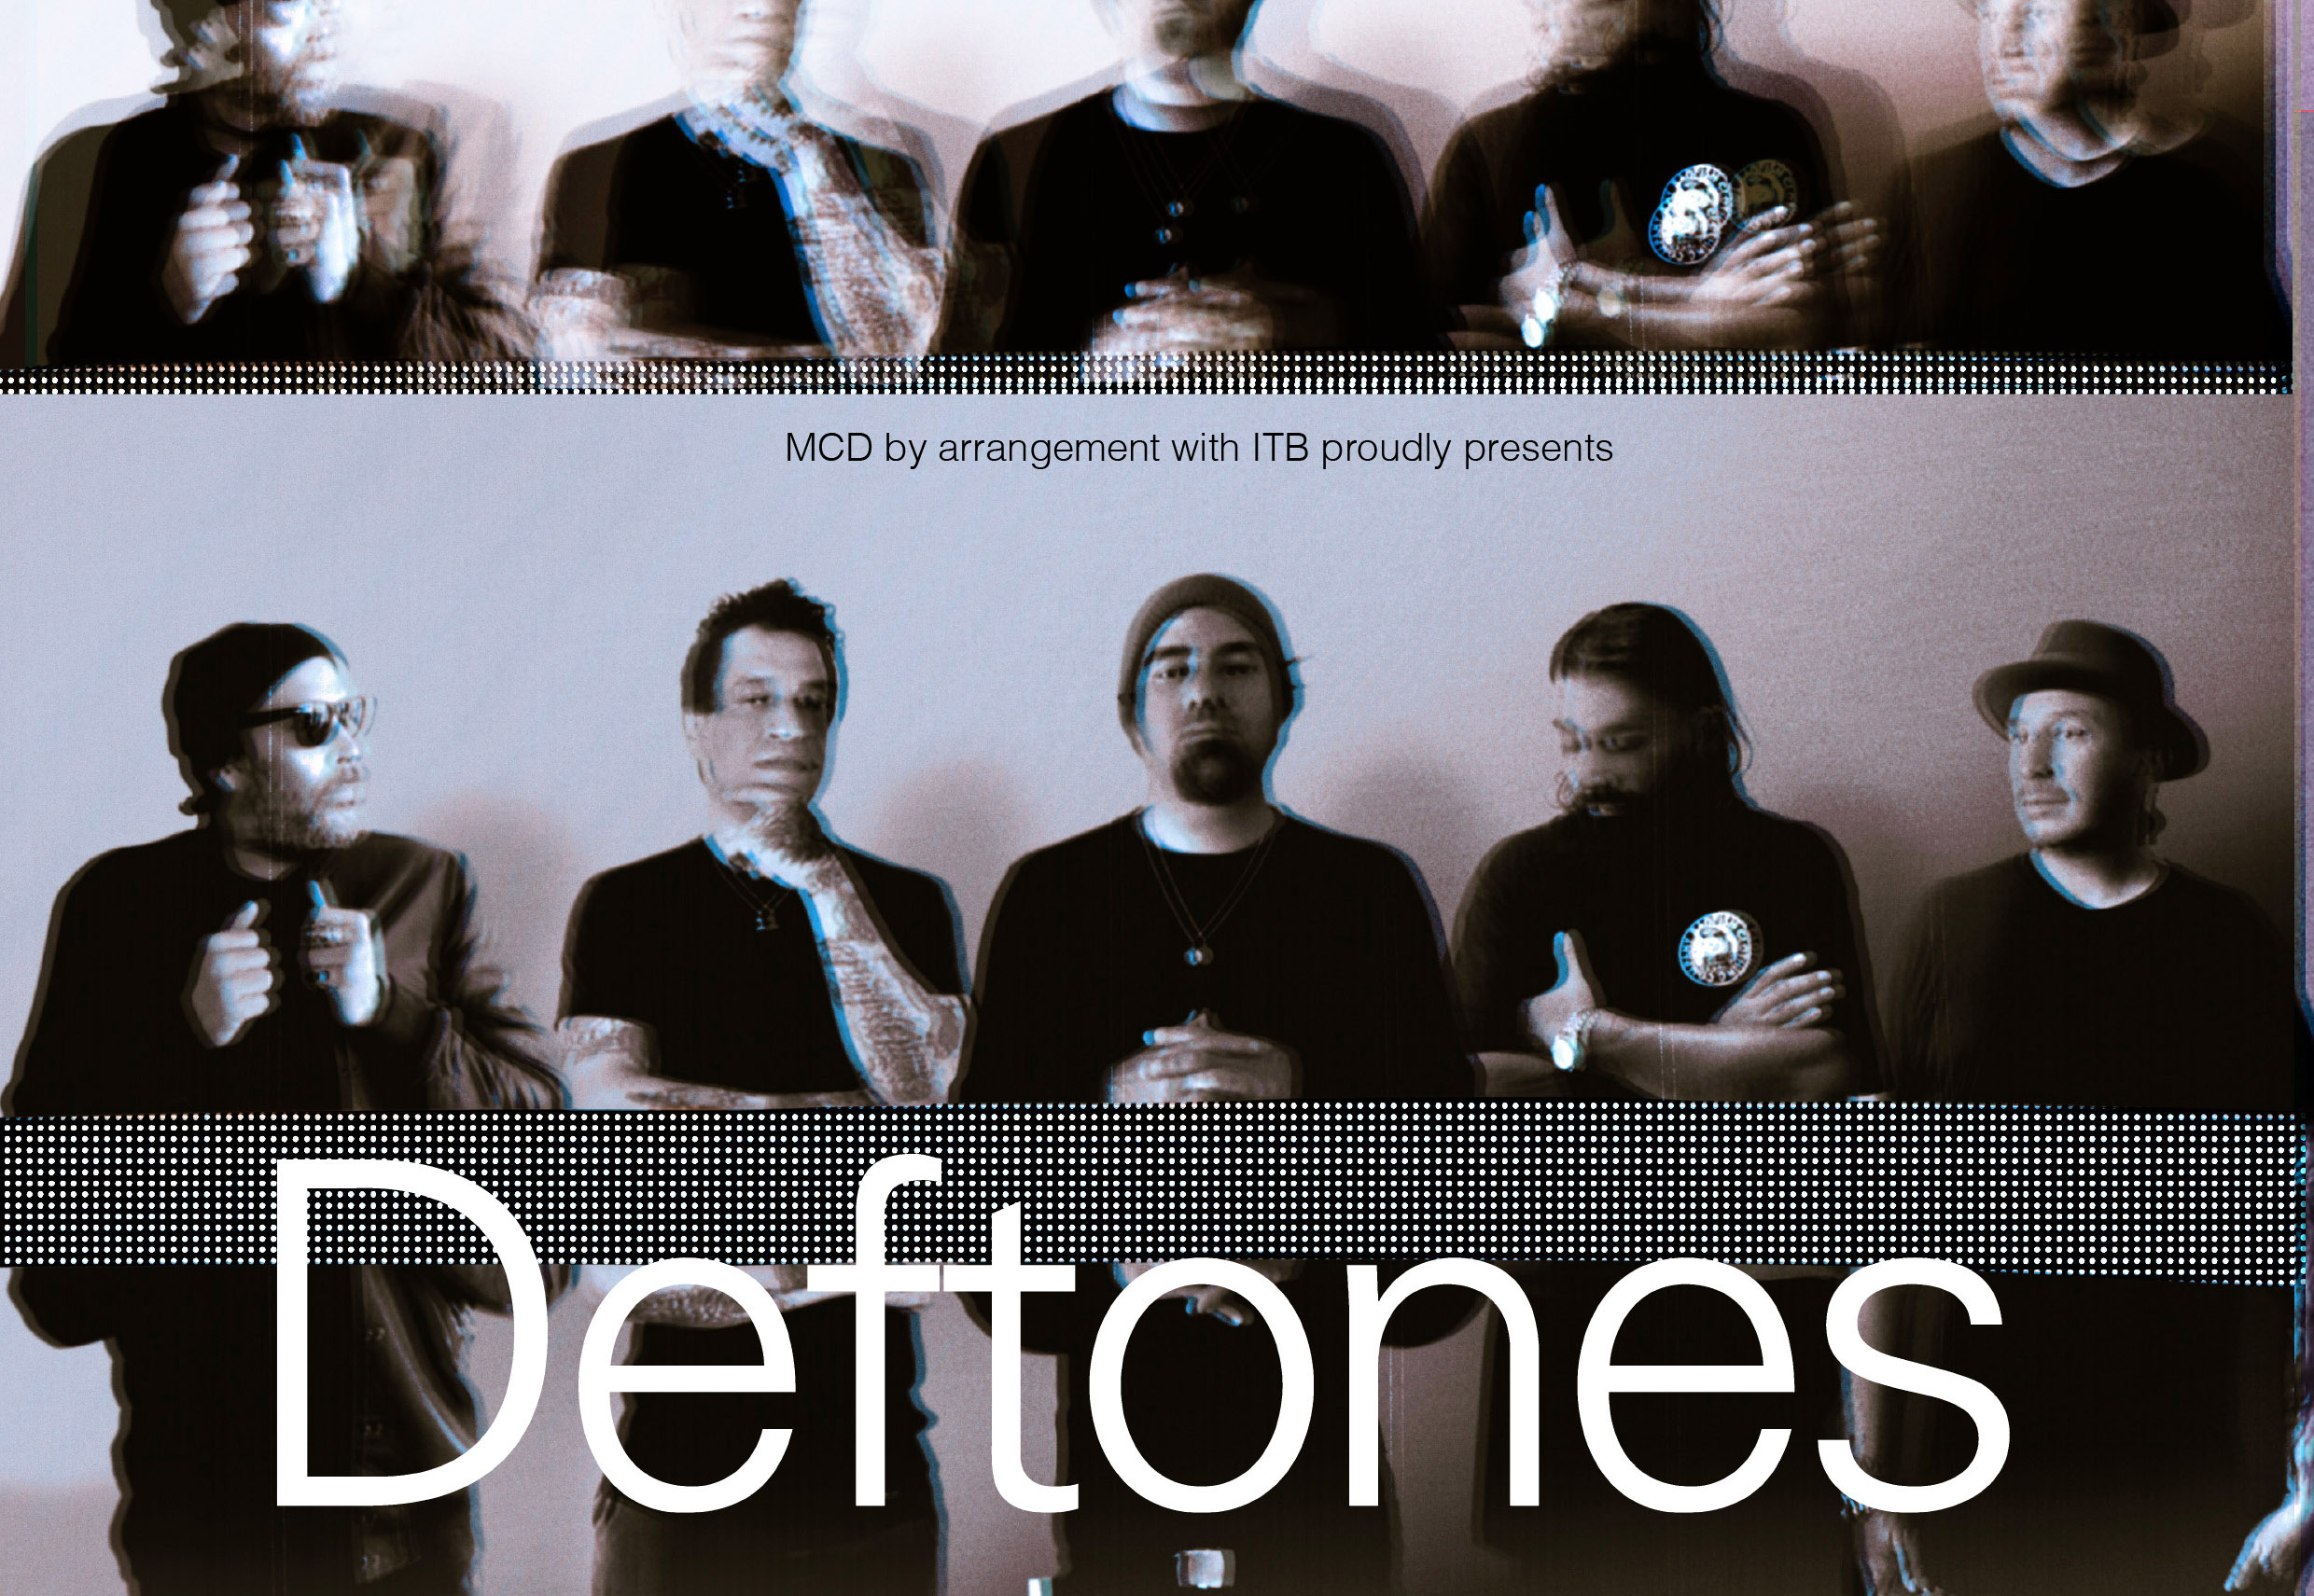 DEFTONES announce headline Dublin show at 3Arena on 6th June 2021 with special guests GOJIRA 1